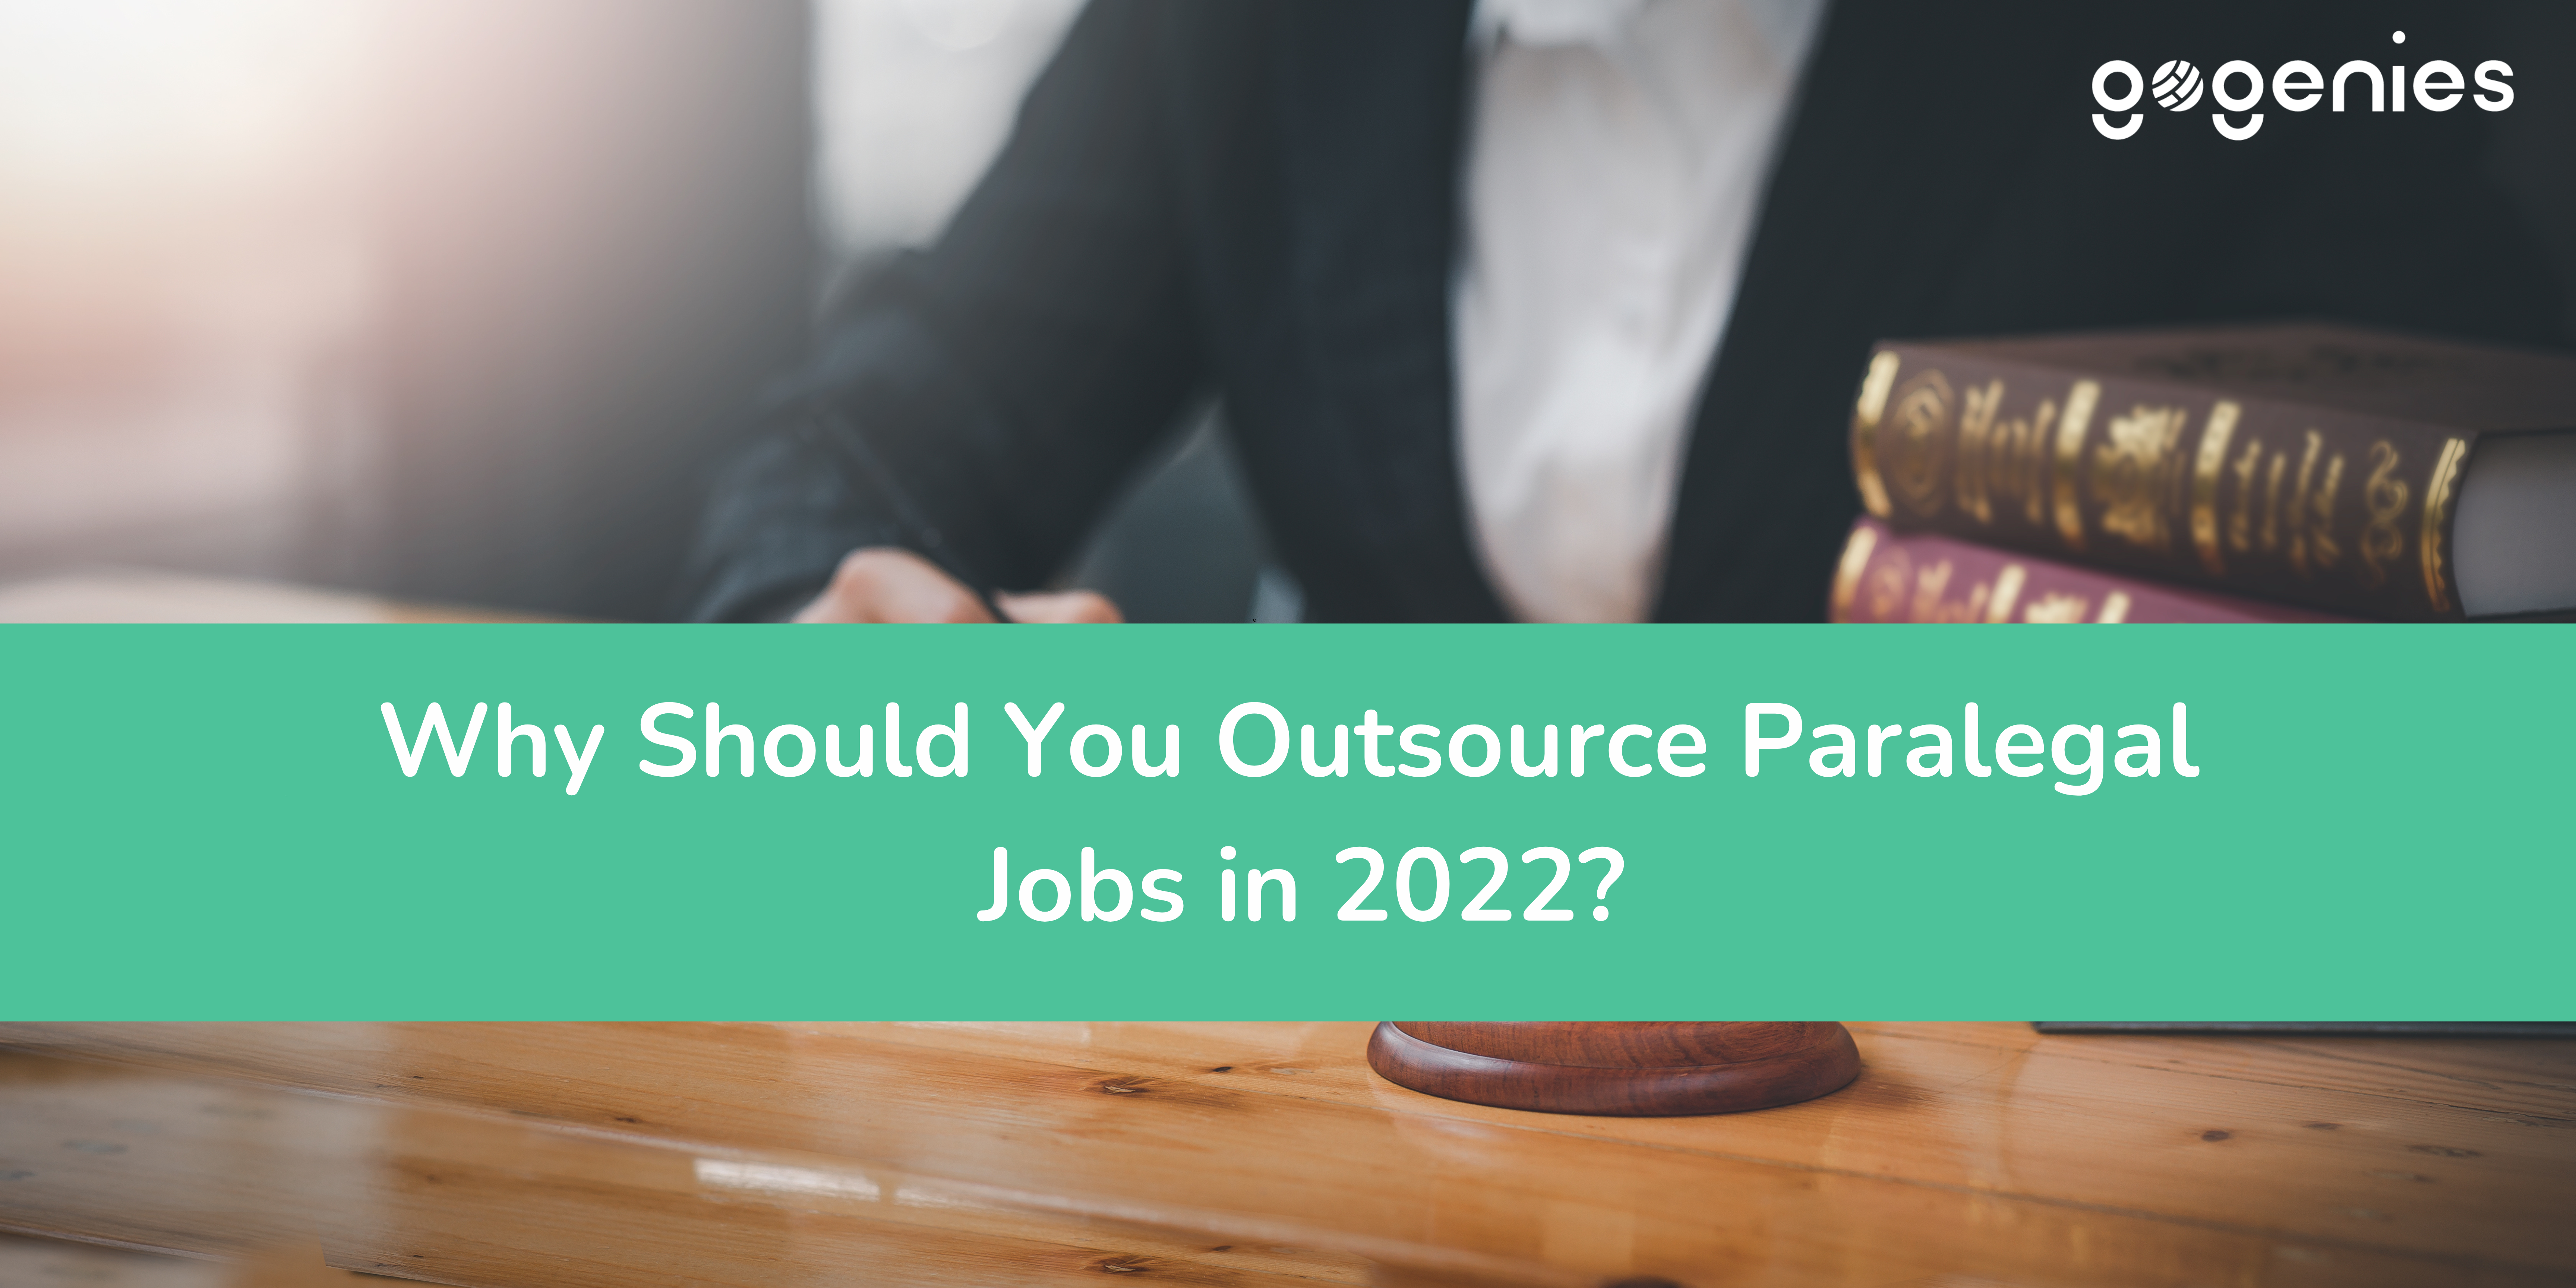 Why Should You Outsource Paralegal Jobs in 2022?